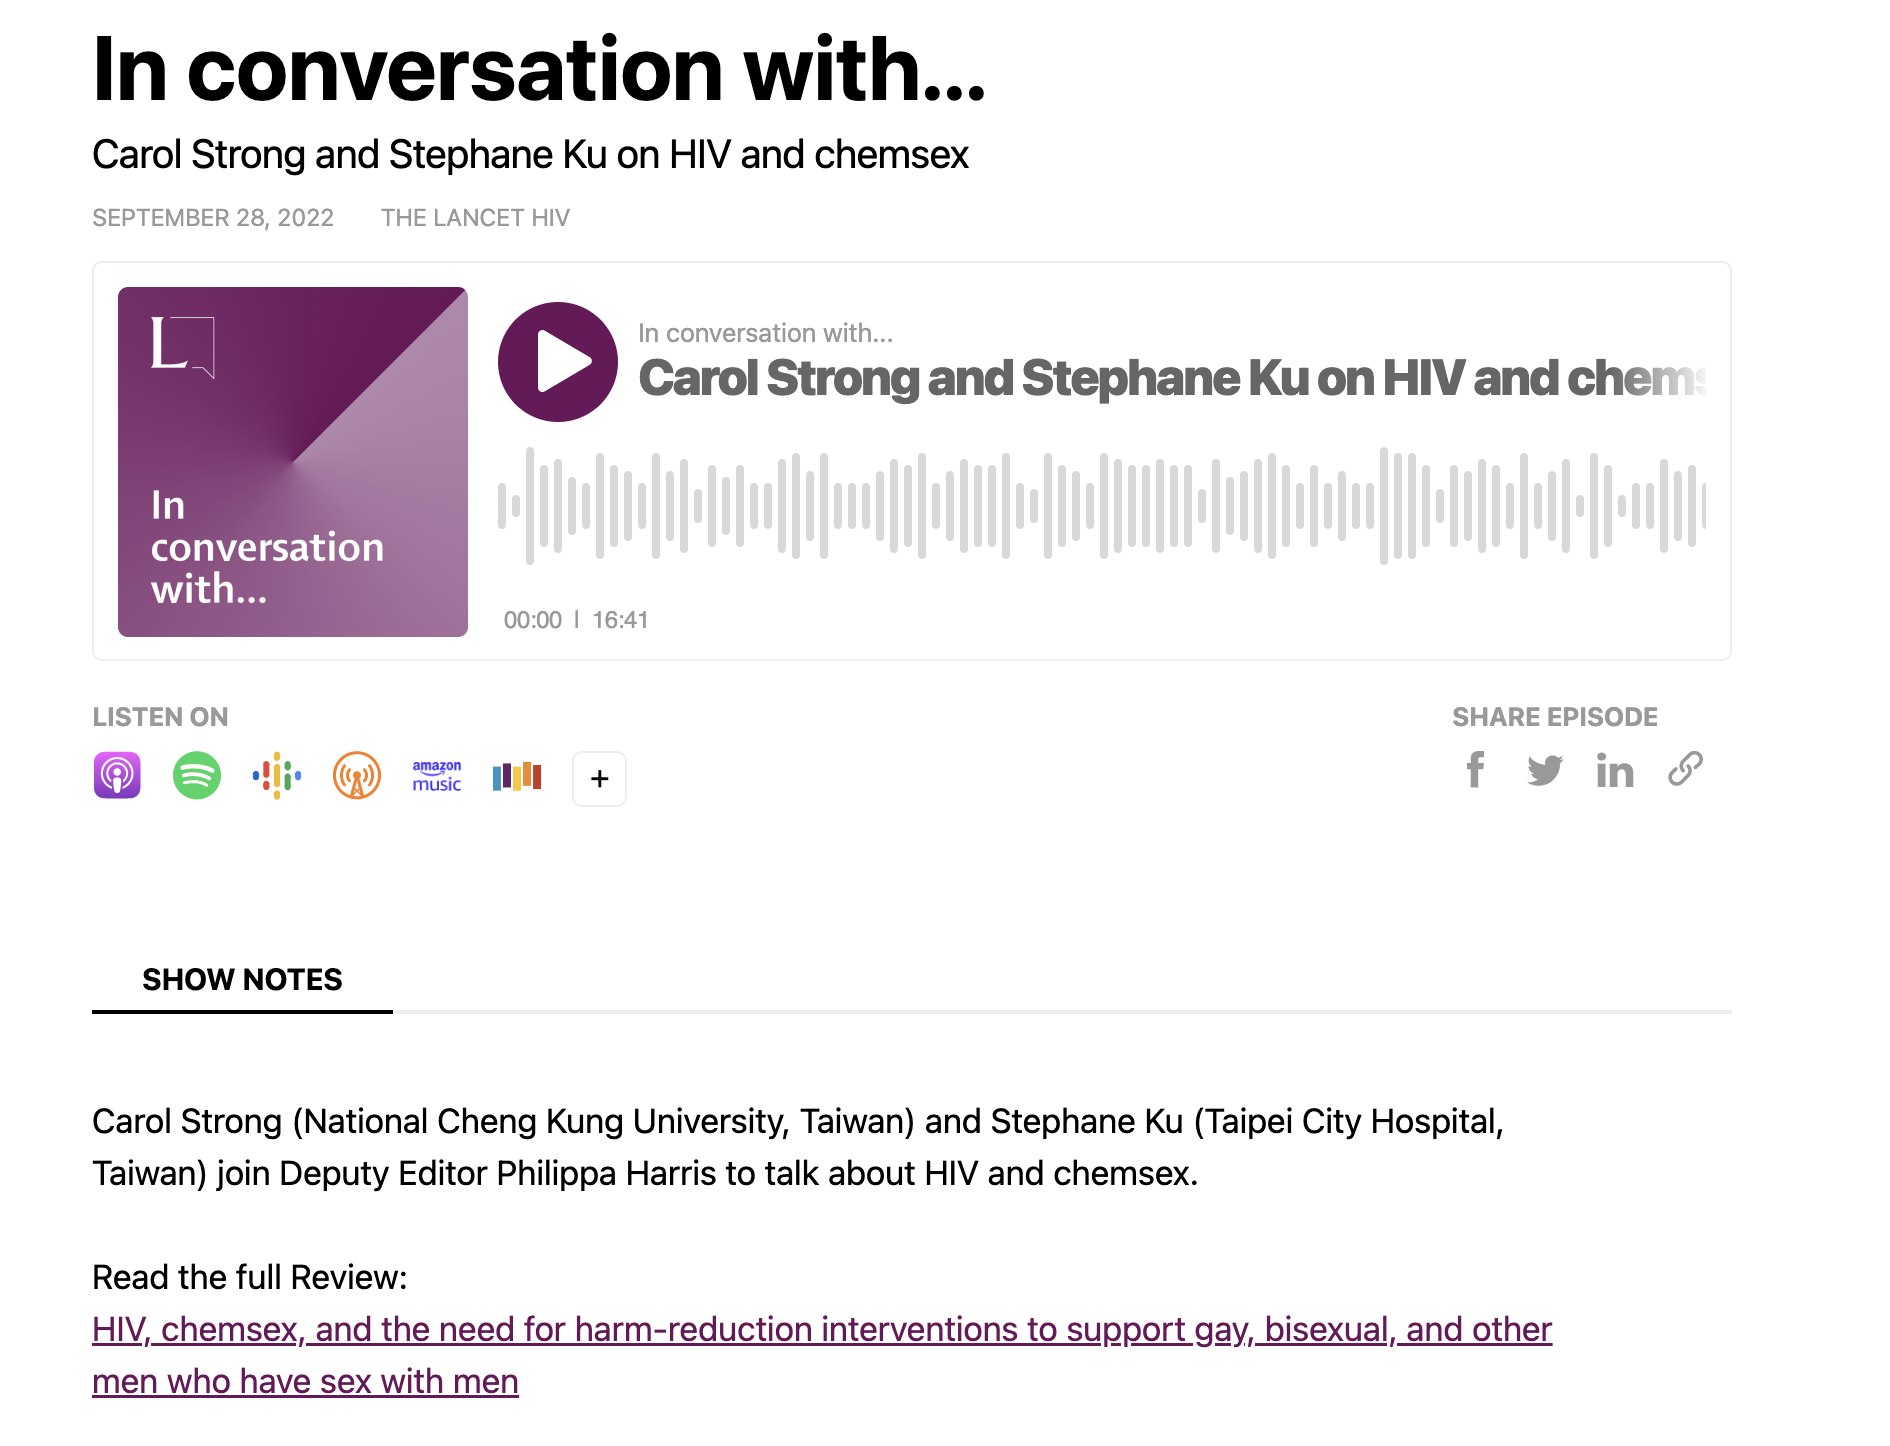 The Lancet HIV Podcast interview with Associate Professor Carol Strong on chemsex, posted on September 28th